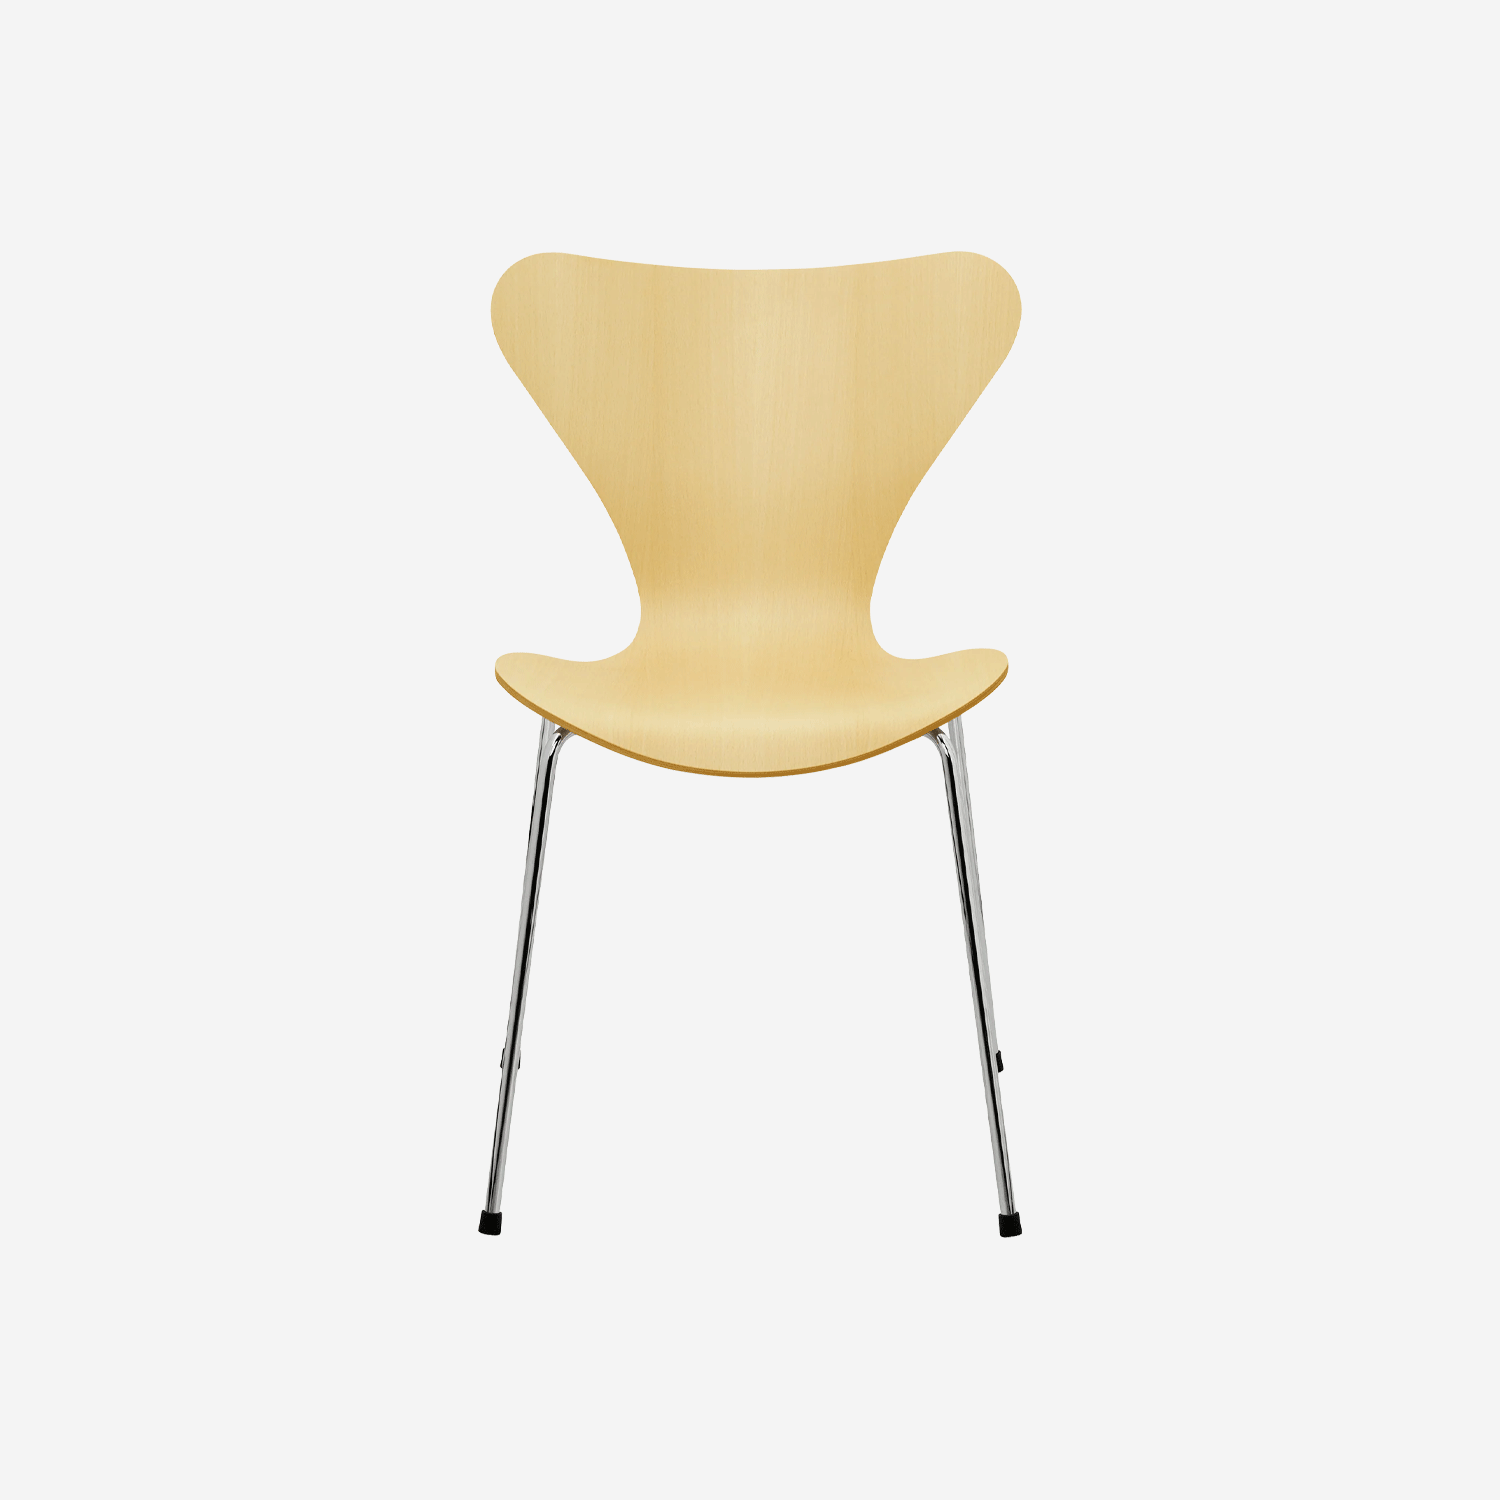 Series 7 chair 3107, lacquered veneer